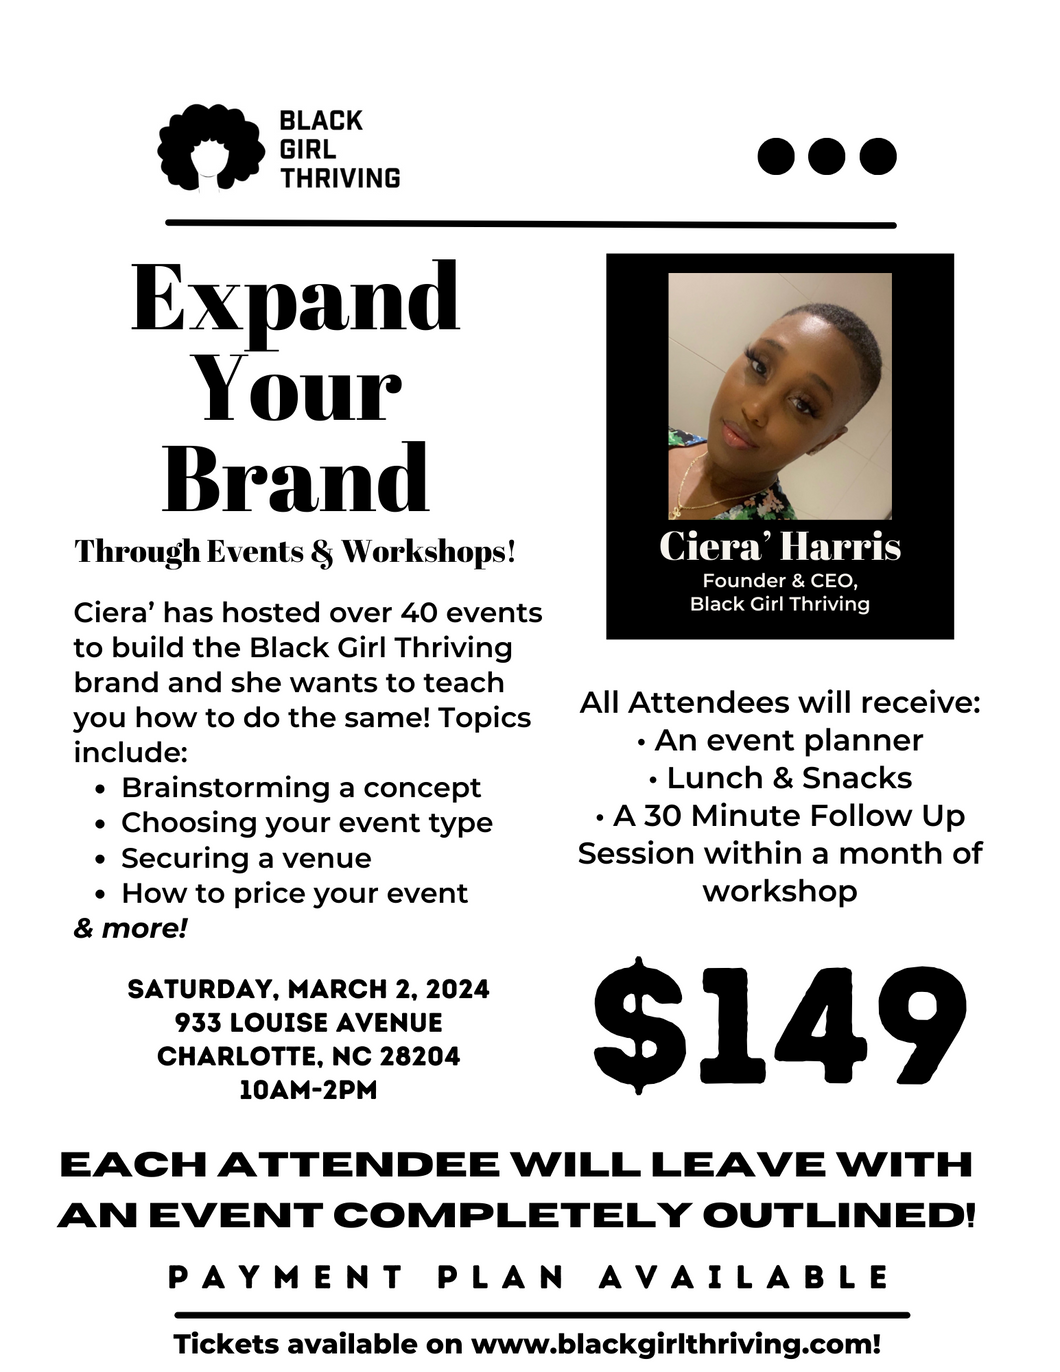 Expand Your Brand Through Events Workshop - 03/02/2024